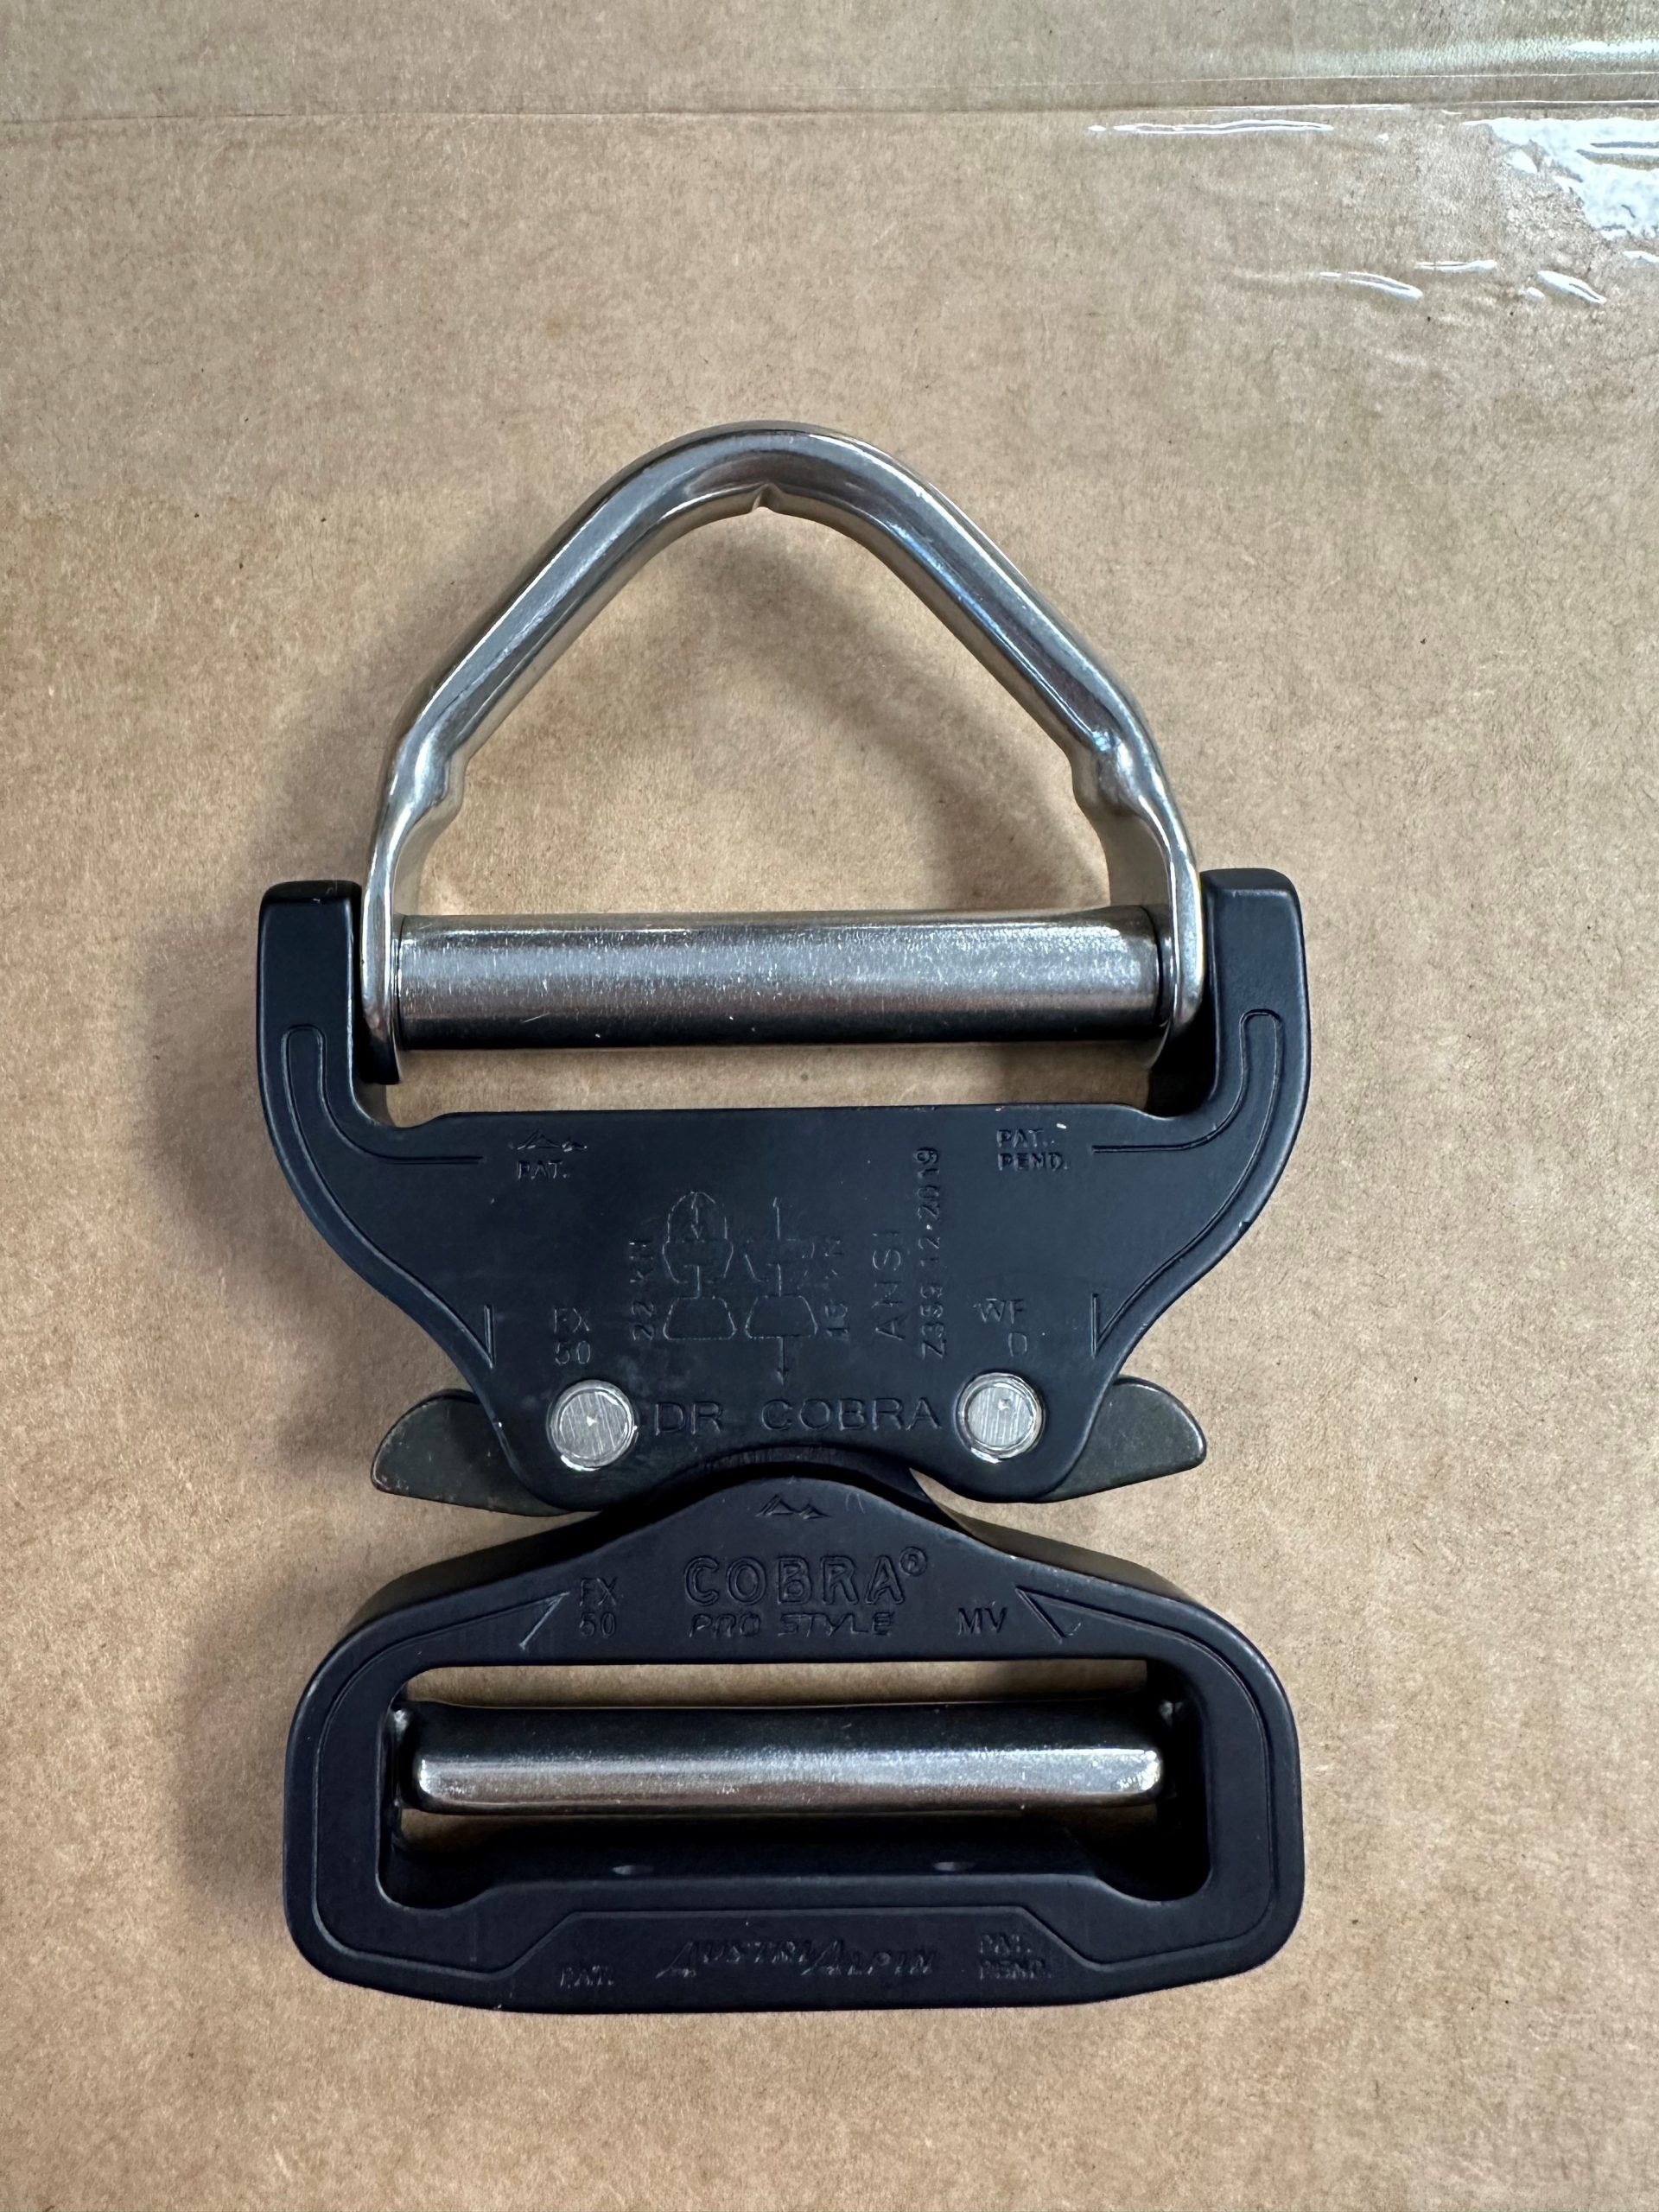 Aluminum Buckle COBRA® PRO STYLE with D-ring 25 - 50 mm